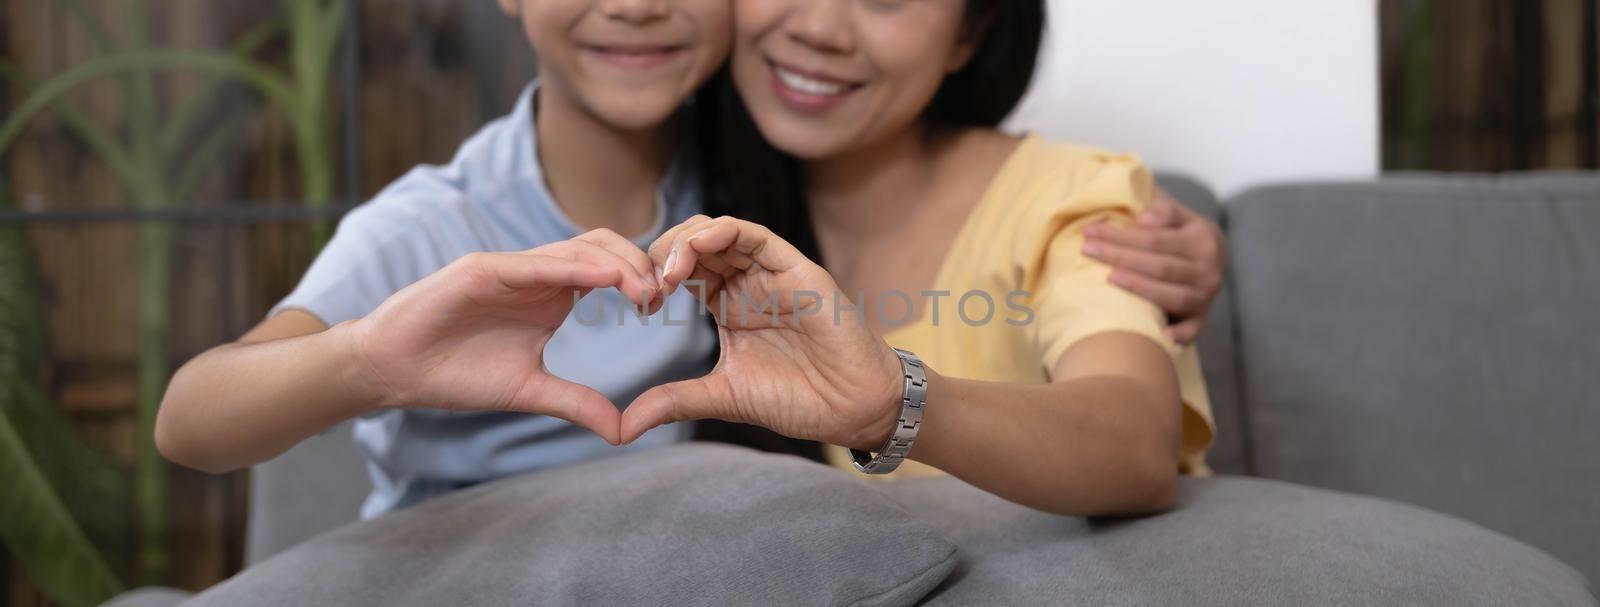 Asian mother and daughter making heart with their hands and smiling to camera. Life insurance, love and support in family relationships concept by wichayada